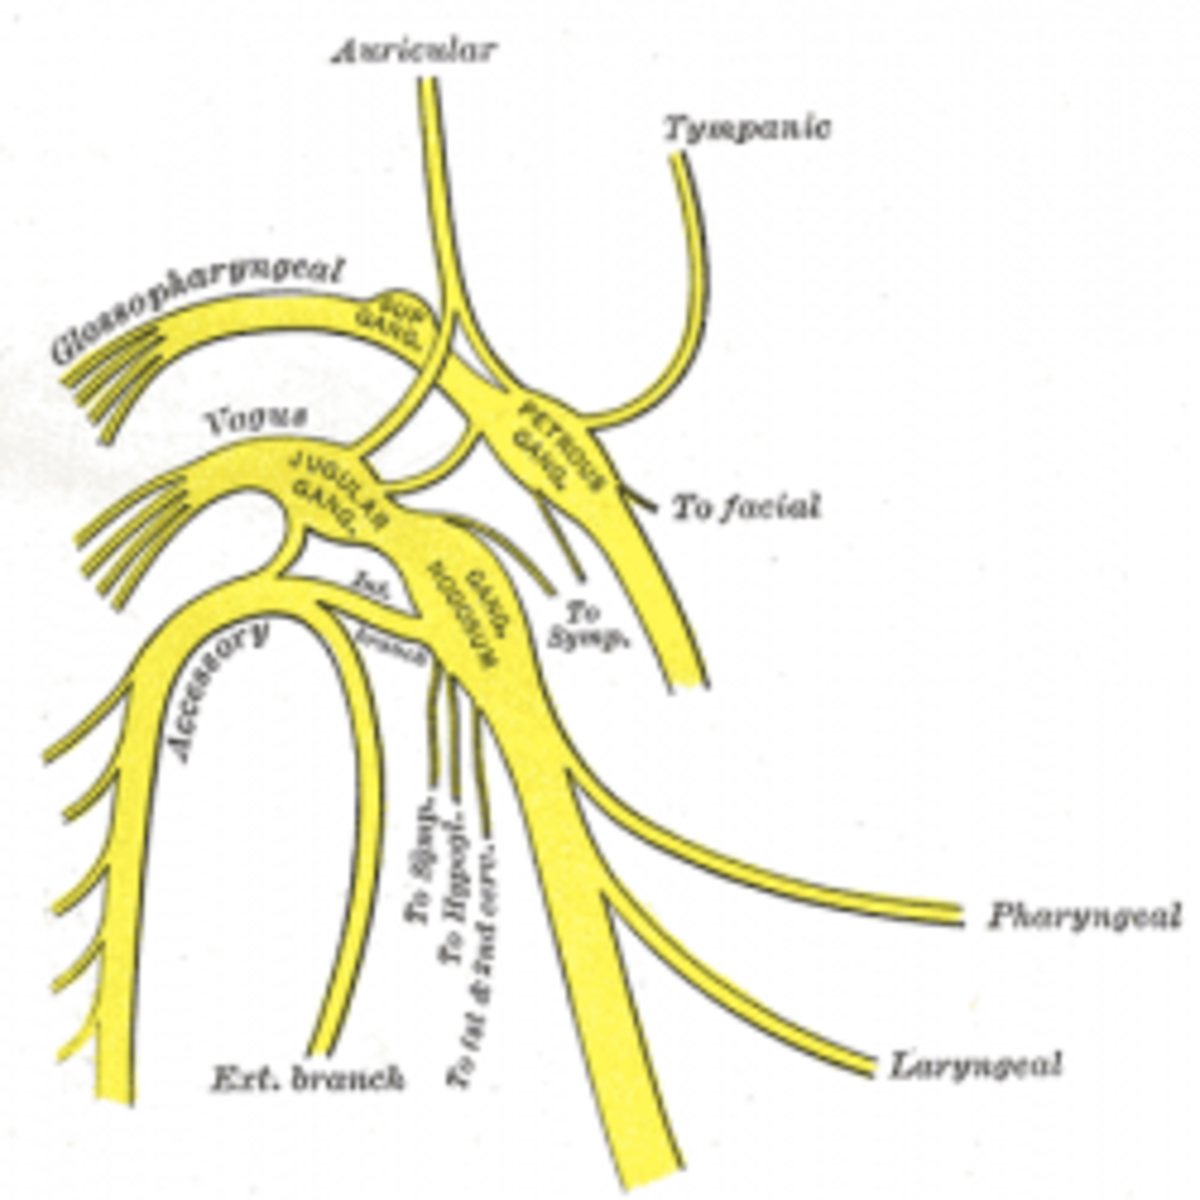 Glossopharyngeal nerve from Gray's Anatomy 1918 edition